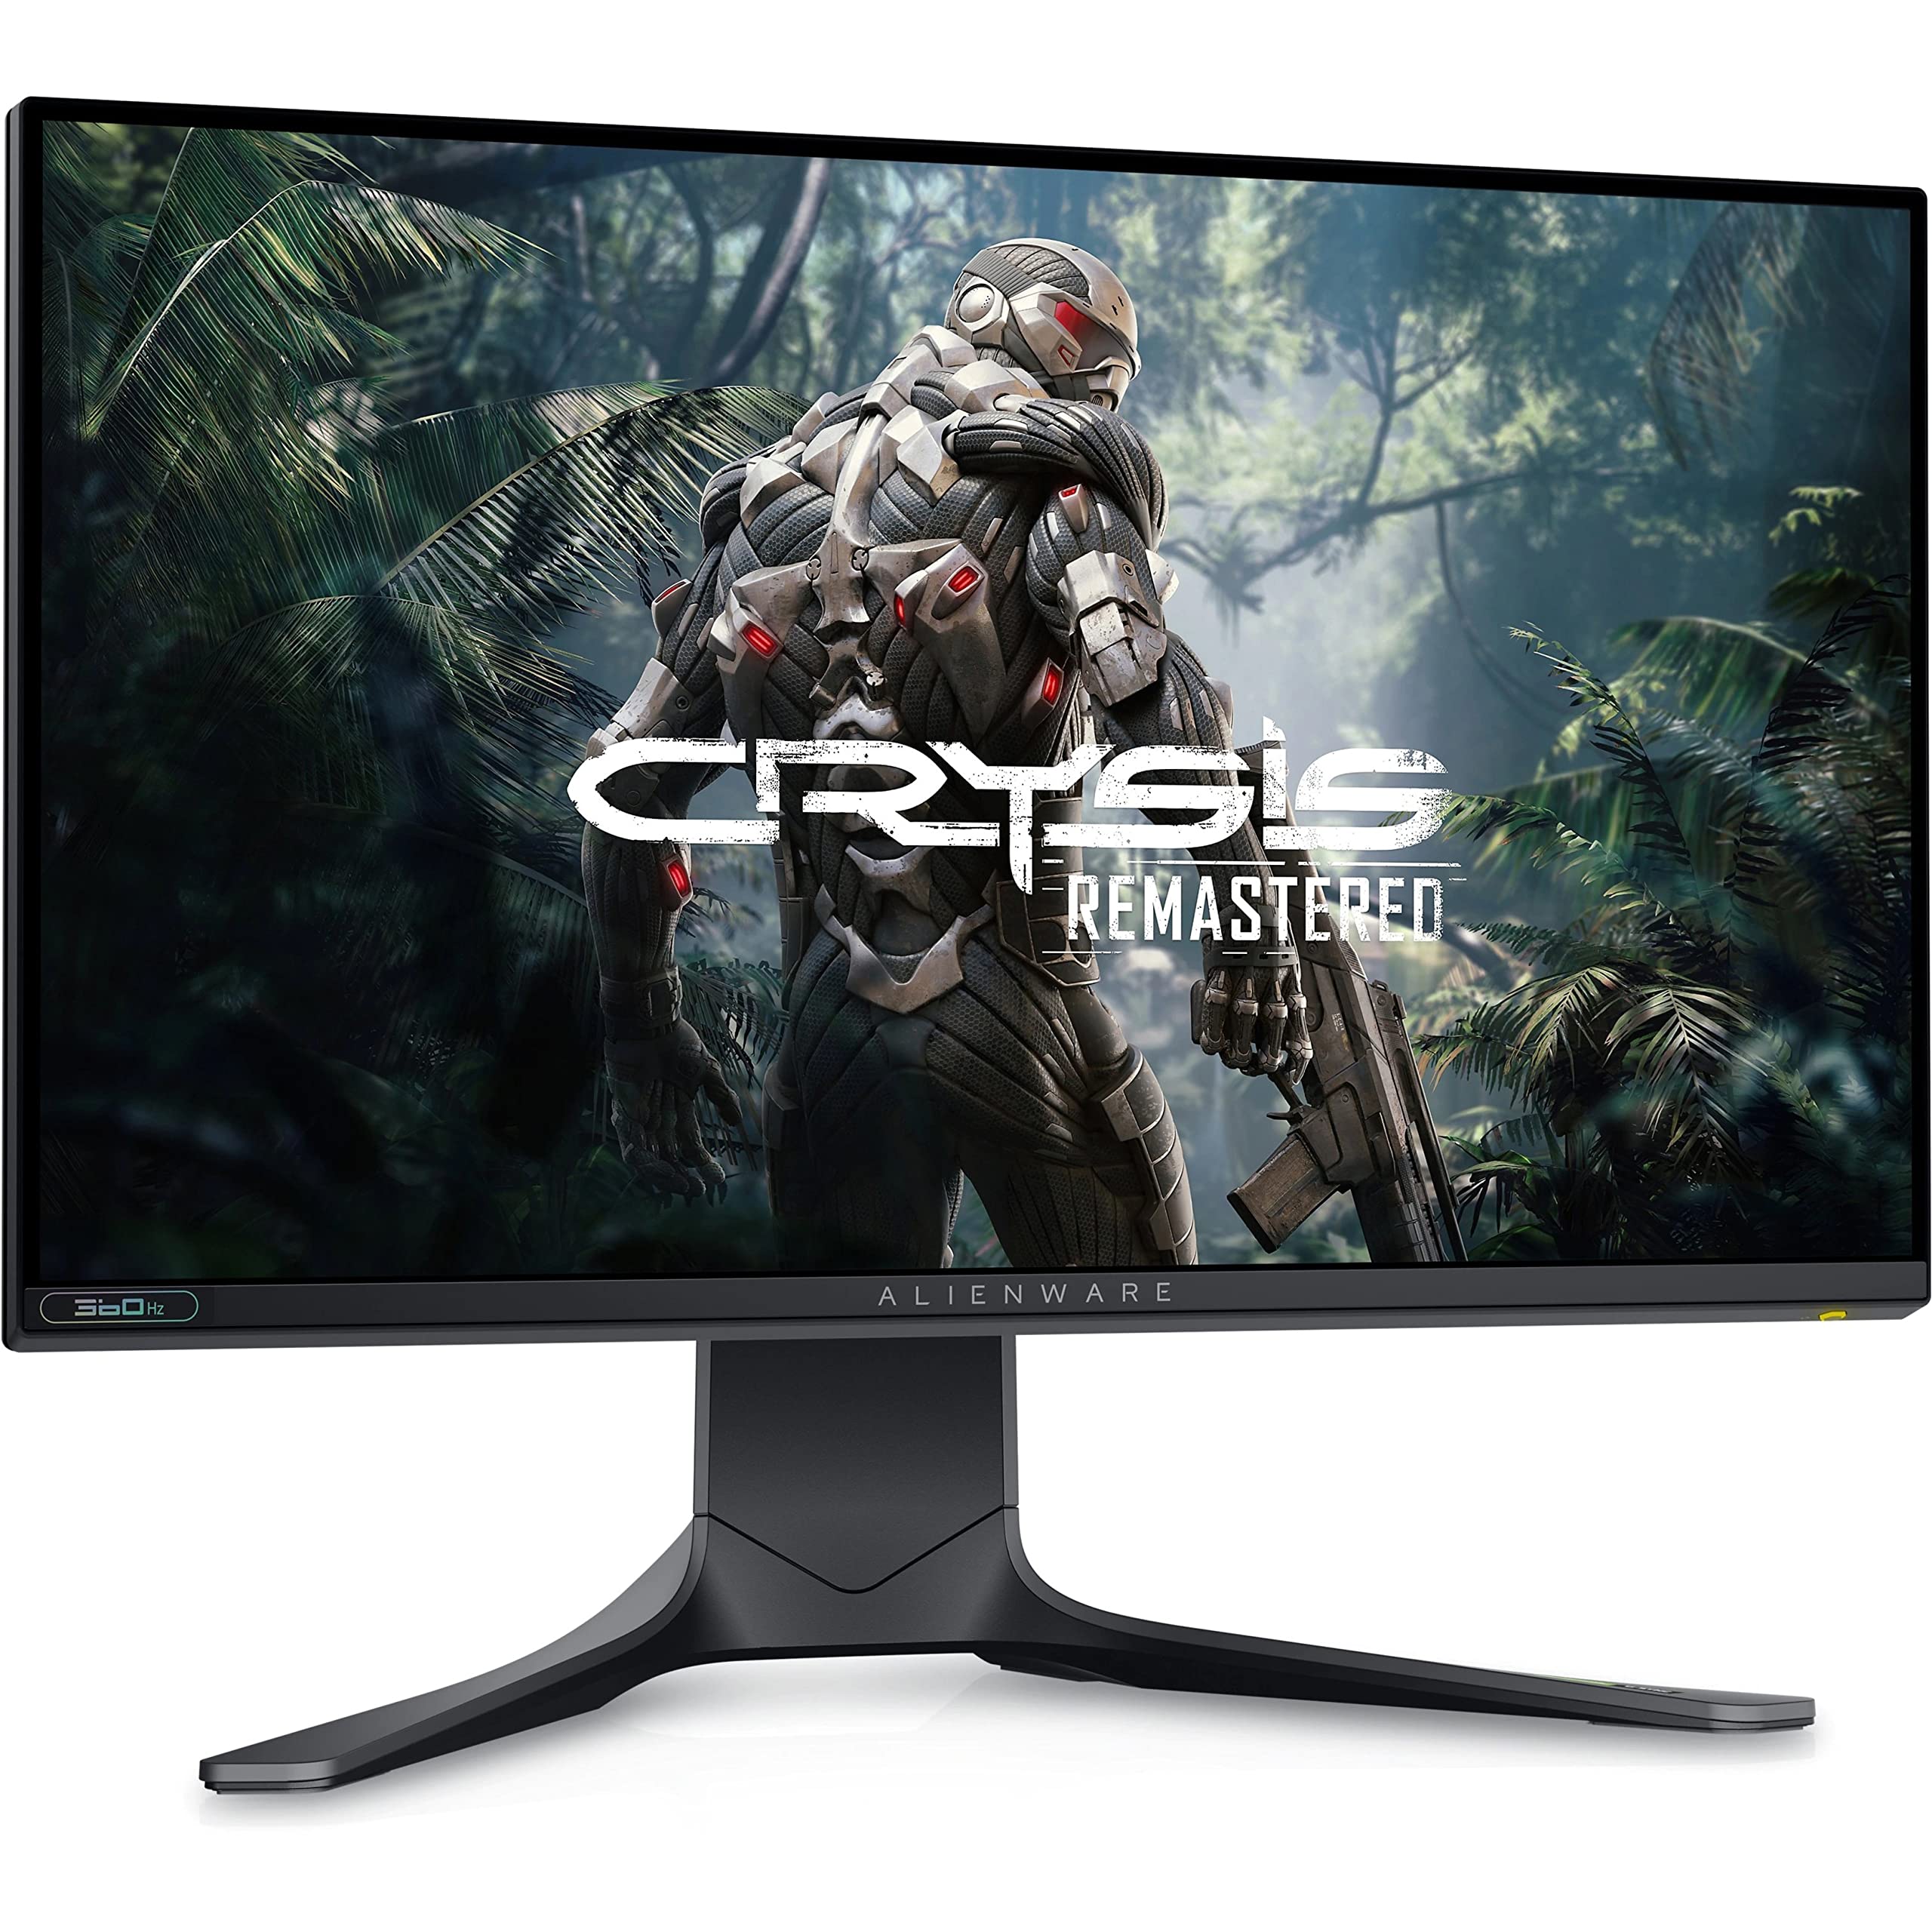 Alienware 360Hz Gaming Monitor 24.5 Inch FHD (Full HD 1920 x 1080p), NVIDIA G-SYNC Certified, 100mm x 100mm VESA Mounting Support, Dark Side of The Moon - AW2521H